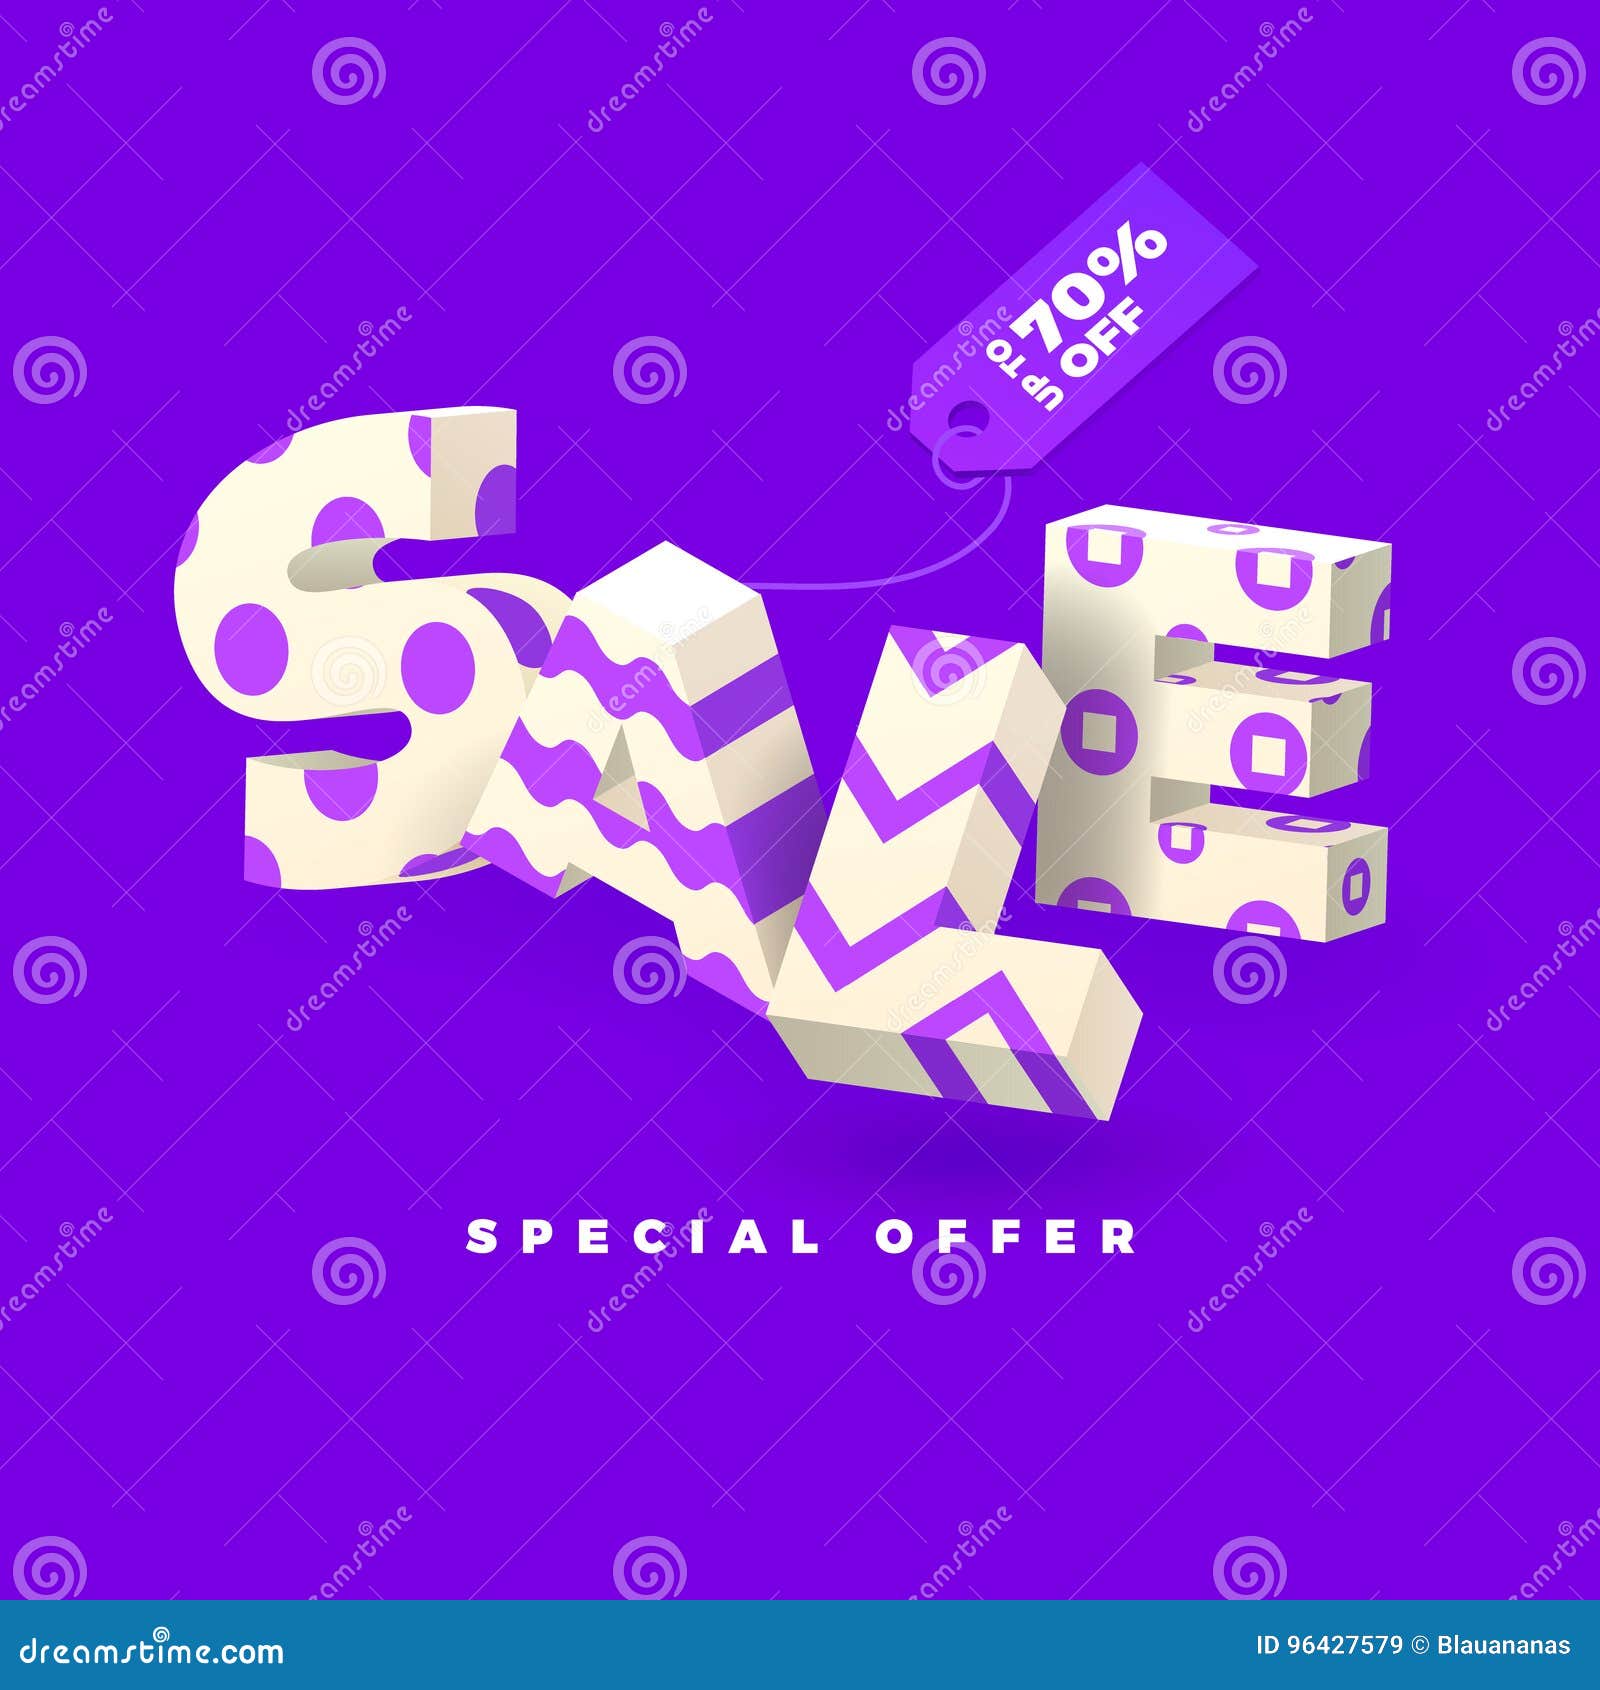 sale banner in purple color, 3d invert letters with pattern